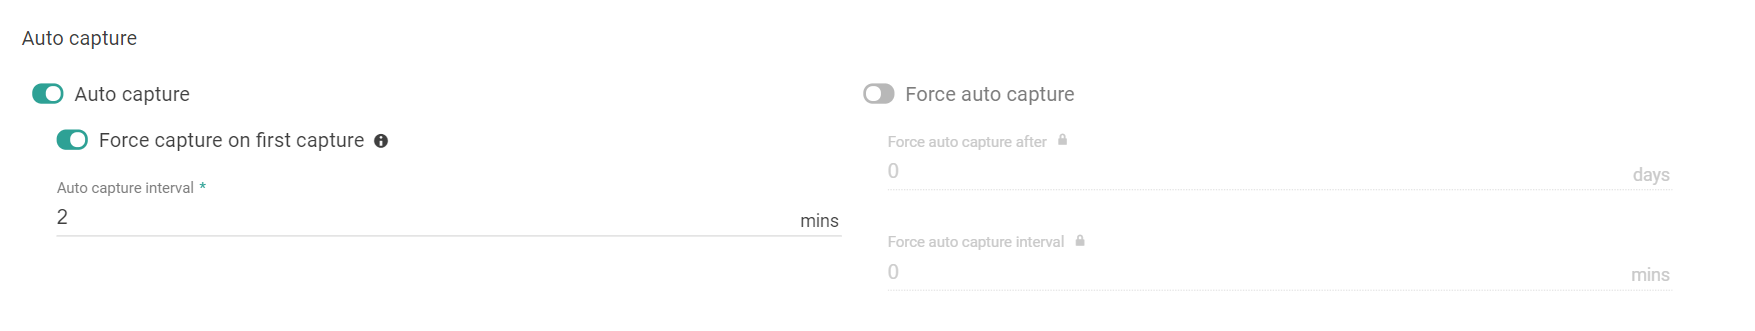 Auto capture settings with auto capture enabled